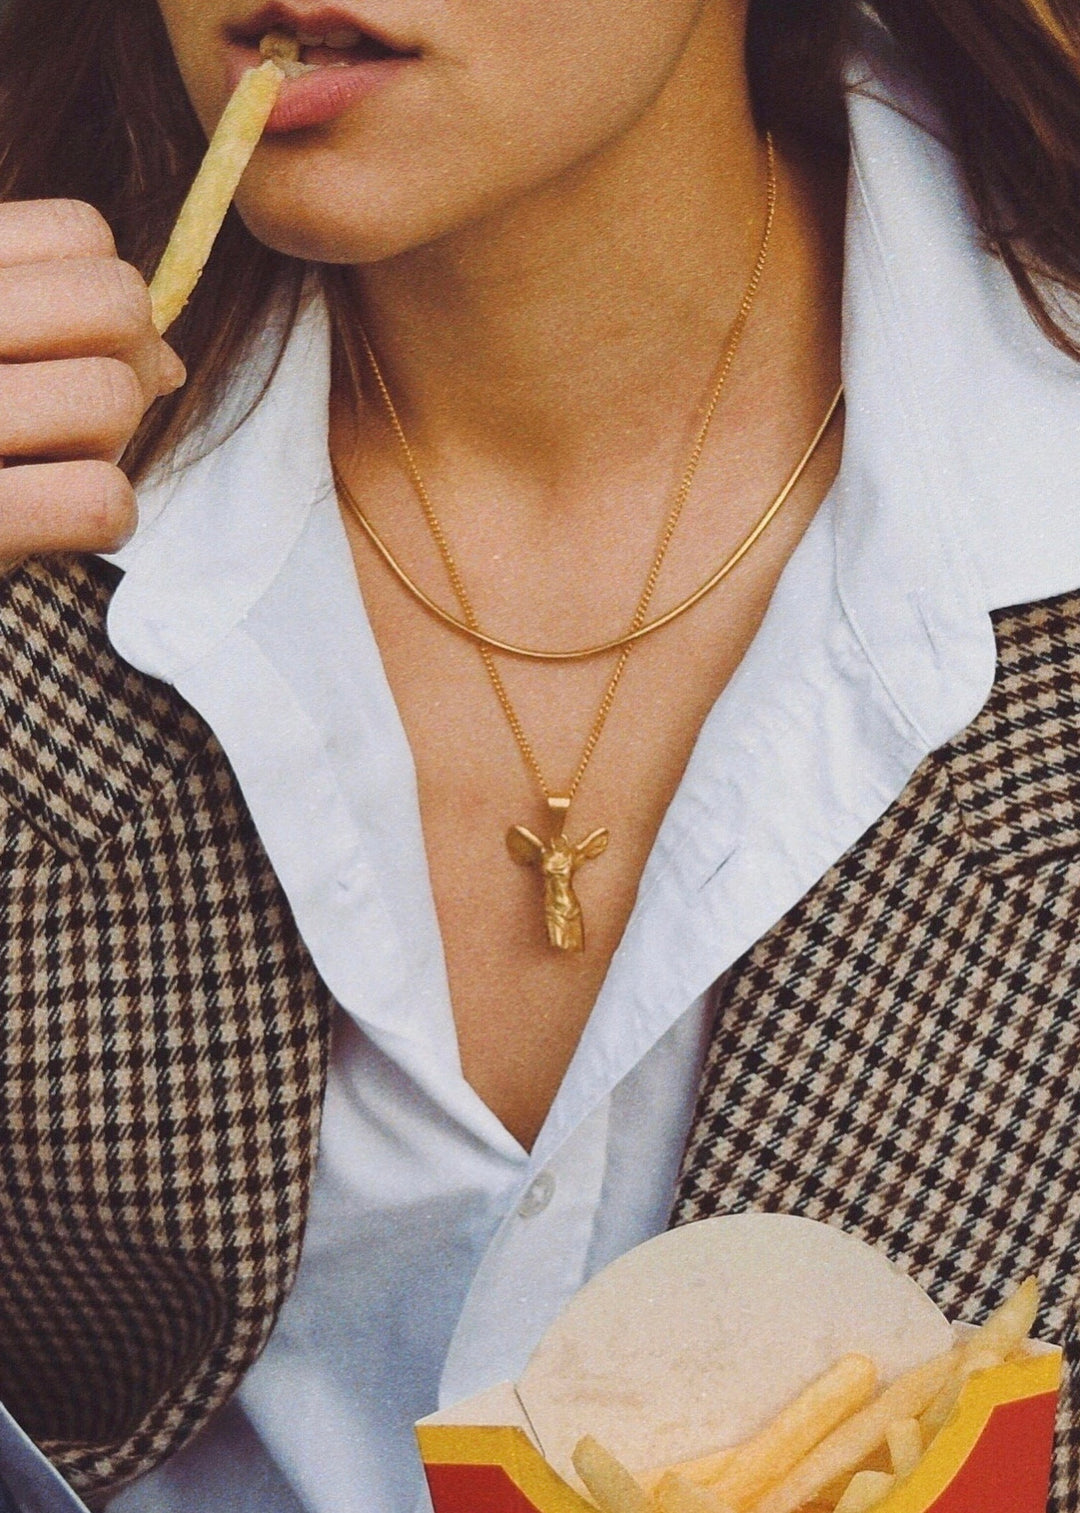 Women wearing The Winged Victory of Samothrace Gold necklace